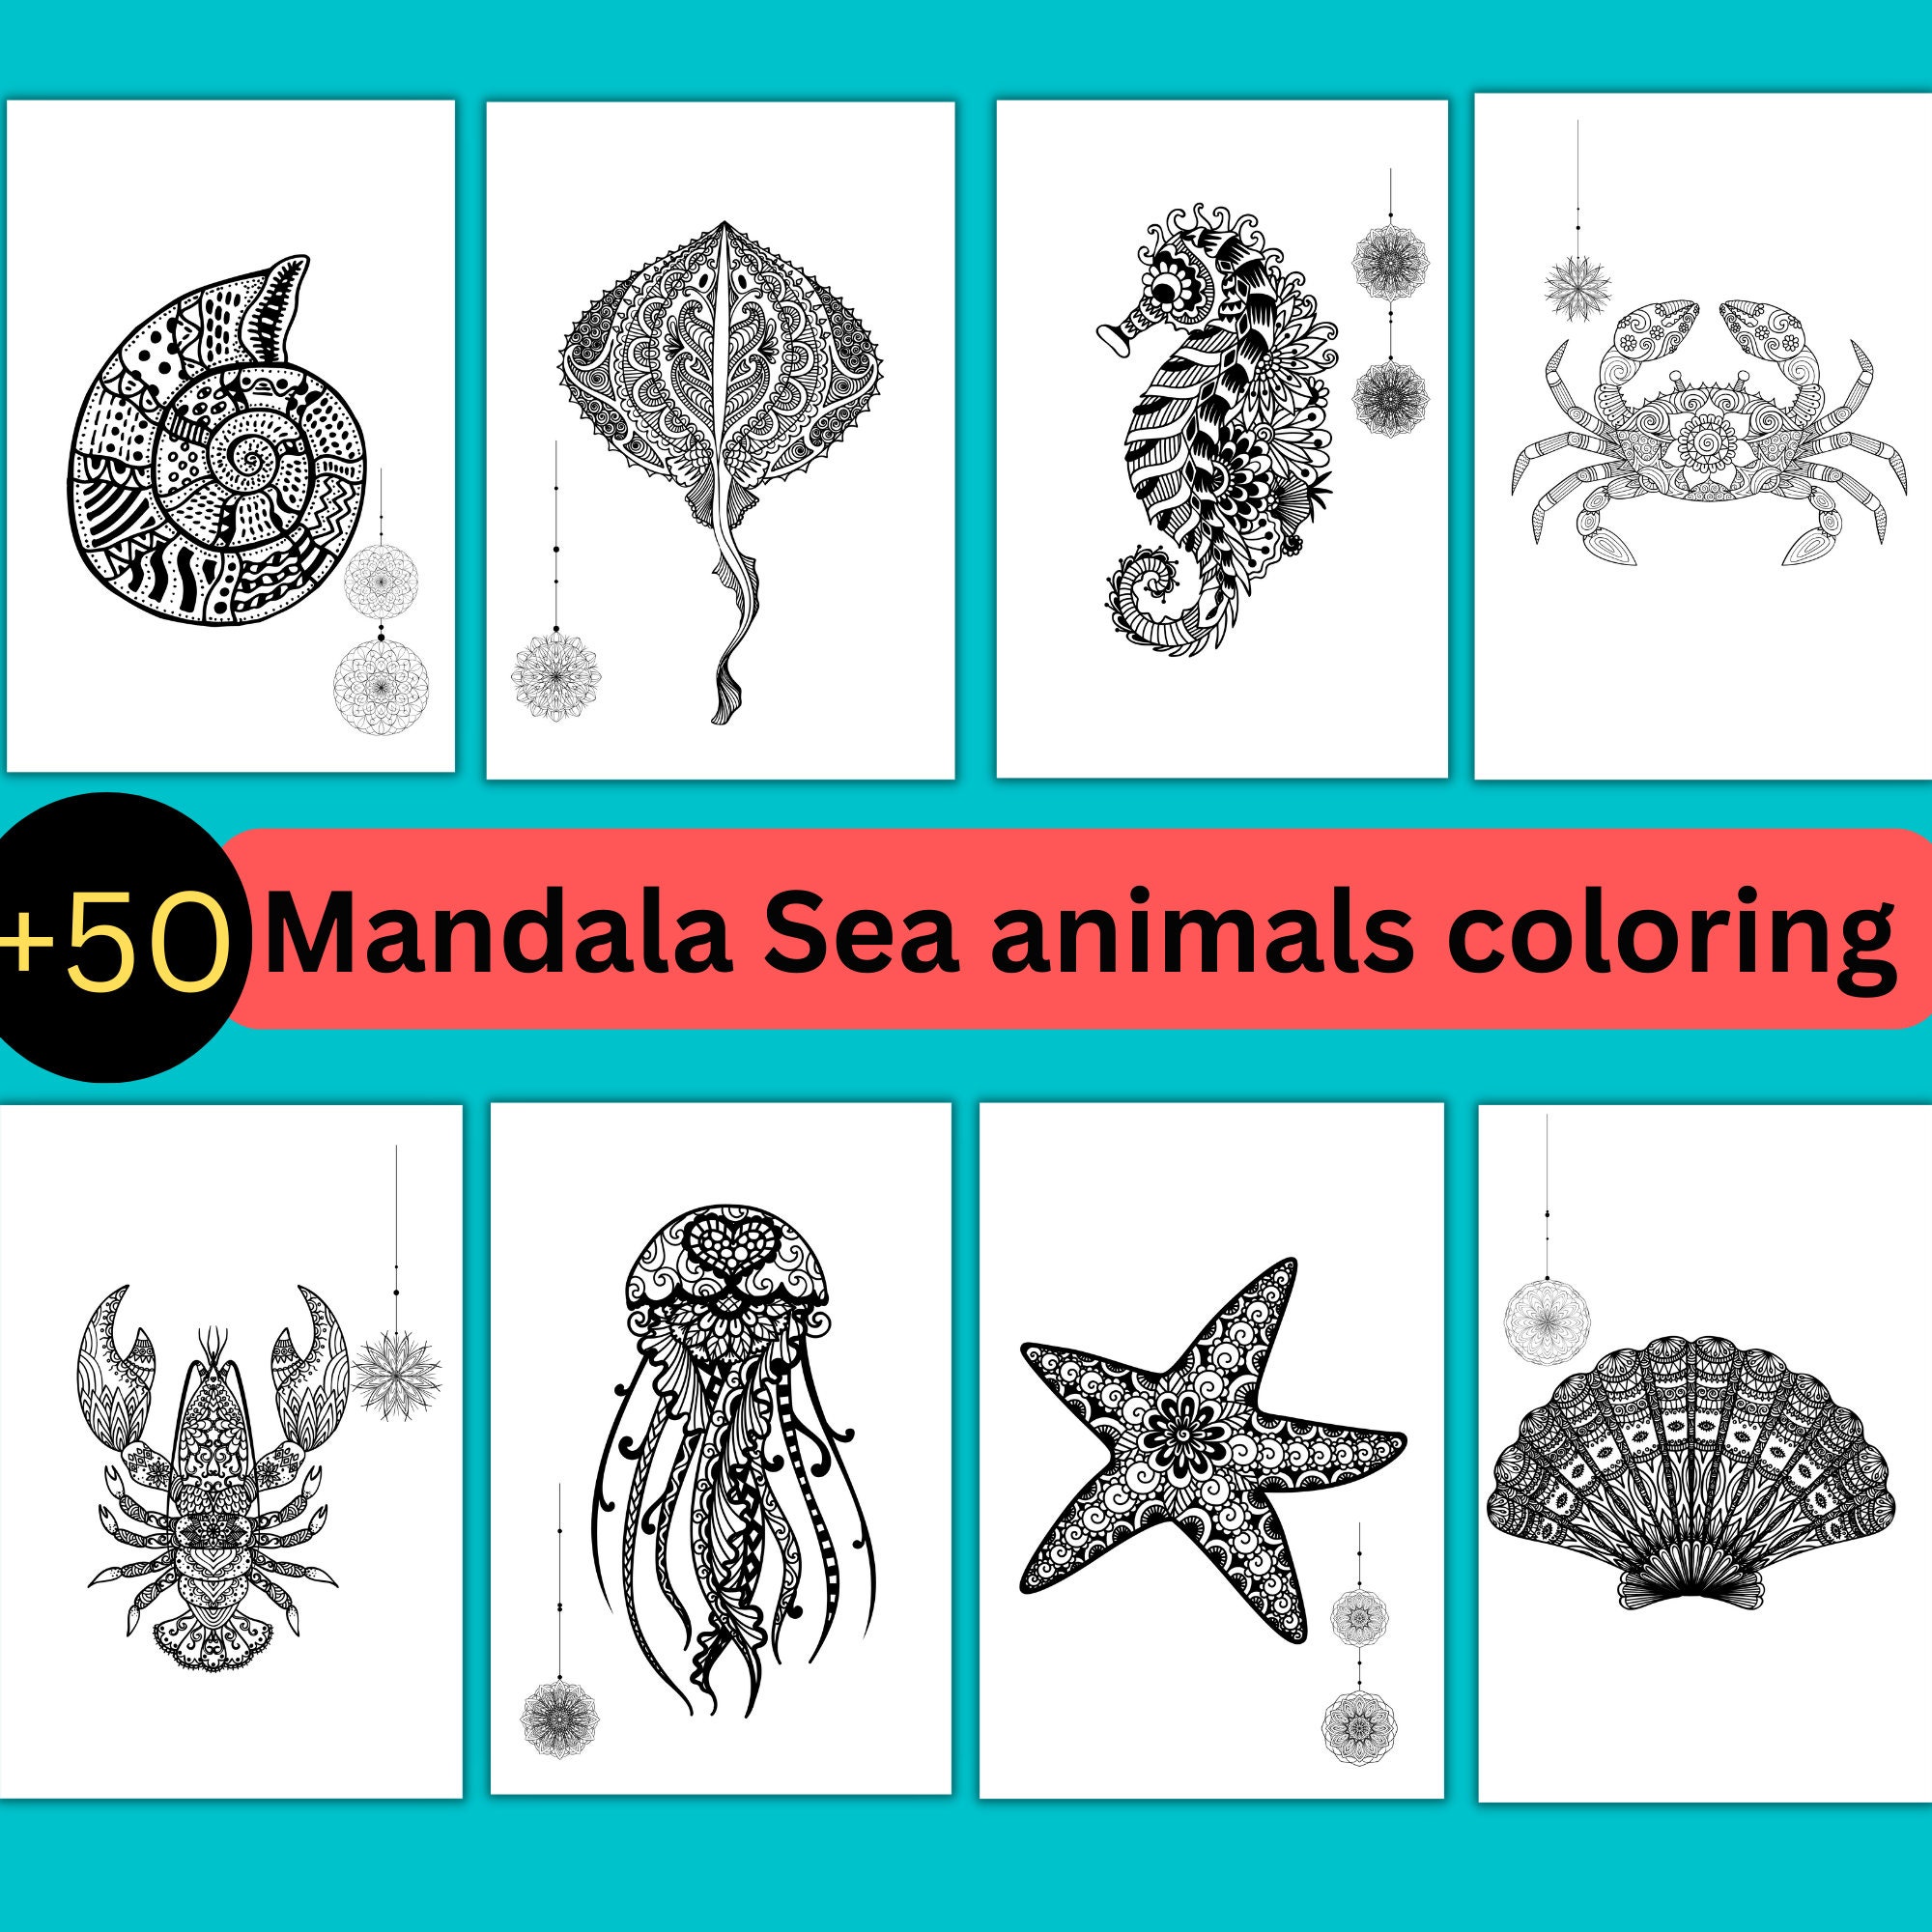 100 Animals: An Adult Coloring Book with 100 beautiful Animal Mandalas  Coloring Pages (Printable PDF / Instant Download)